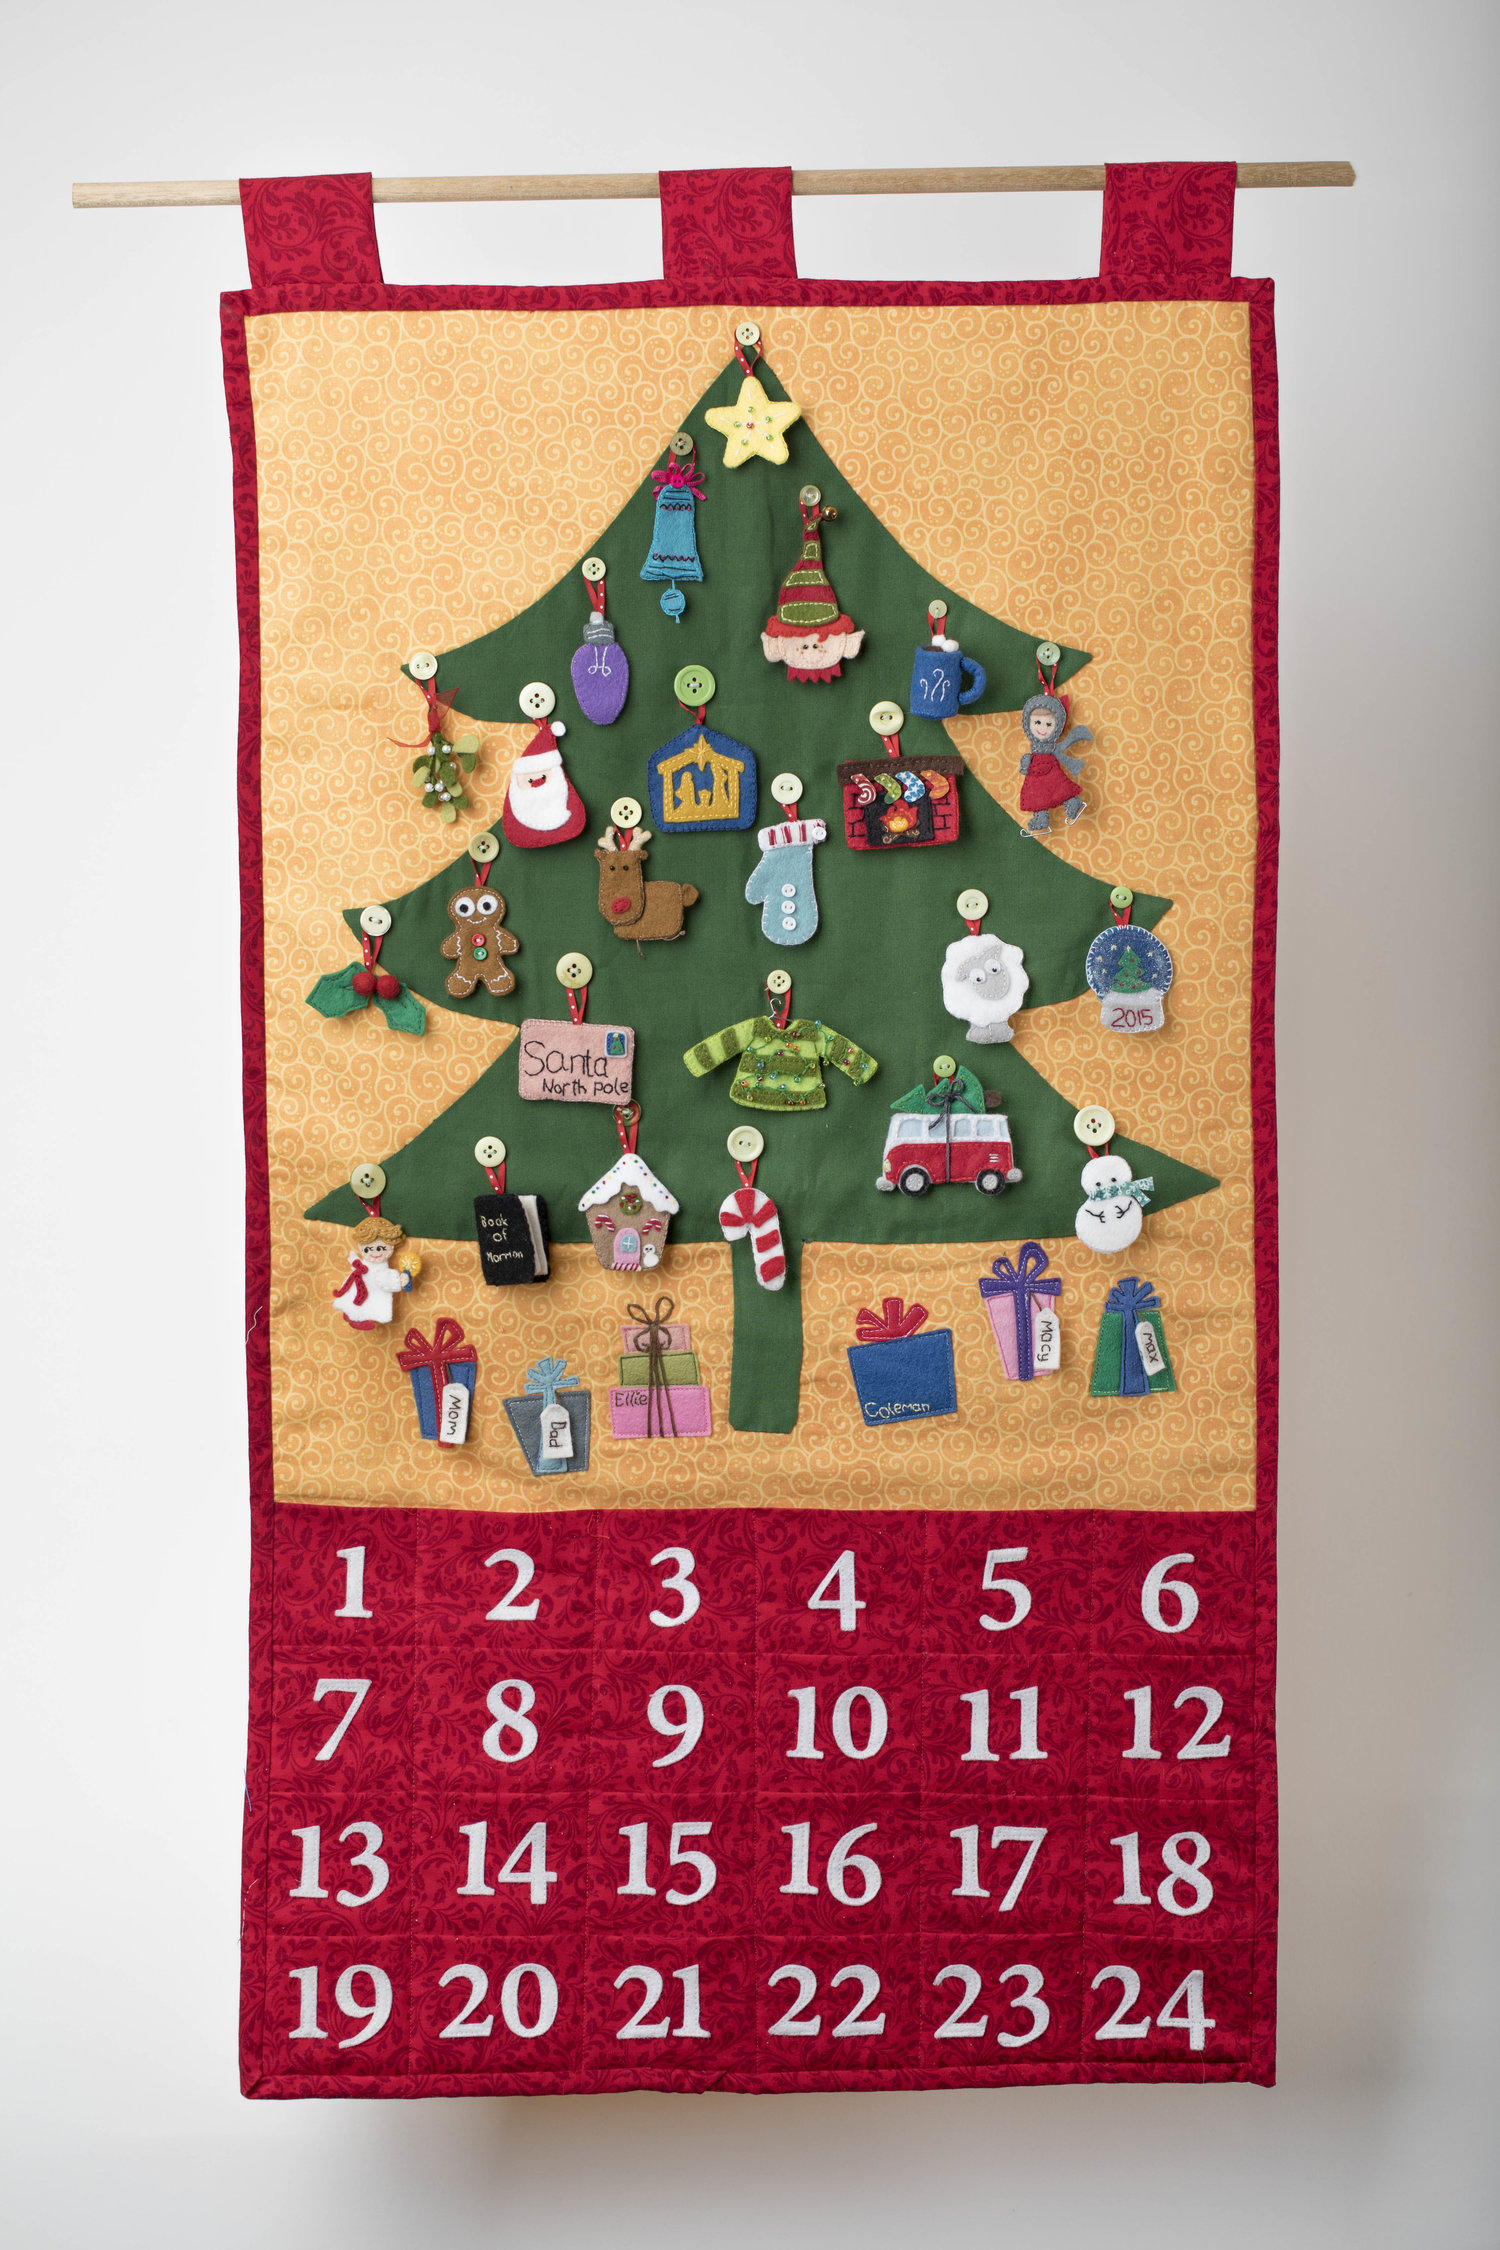 Vintage Christmas Sewing Pattern 18 Calico Fabric Advent Tree Centerpiece PDF Instant Digital Download Holiday Calendar Tabletop Tree E1